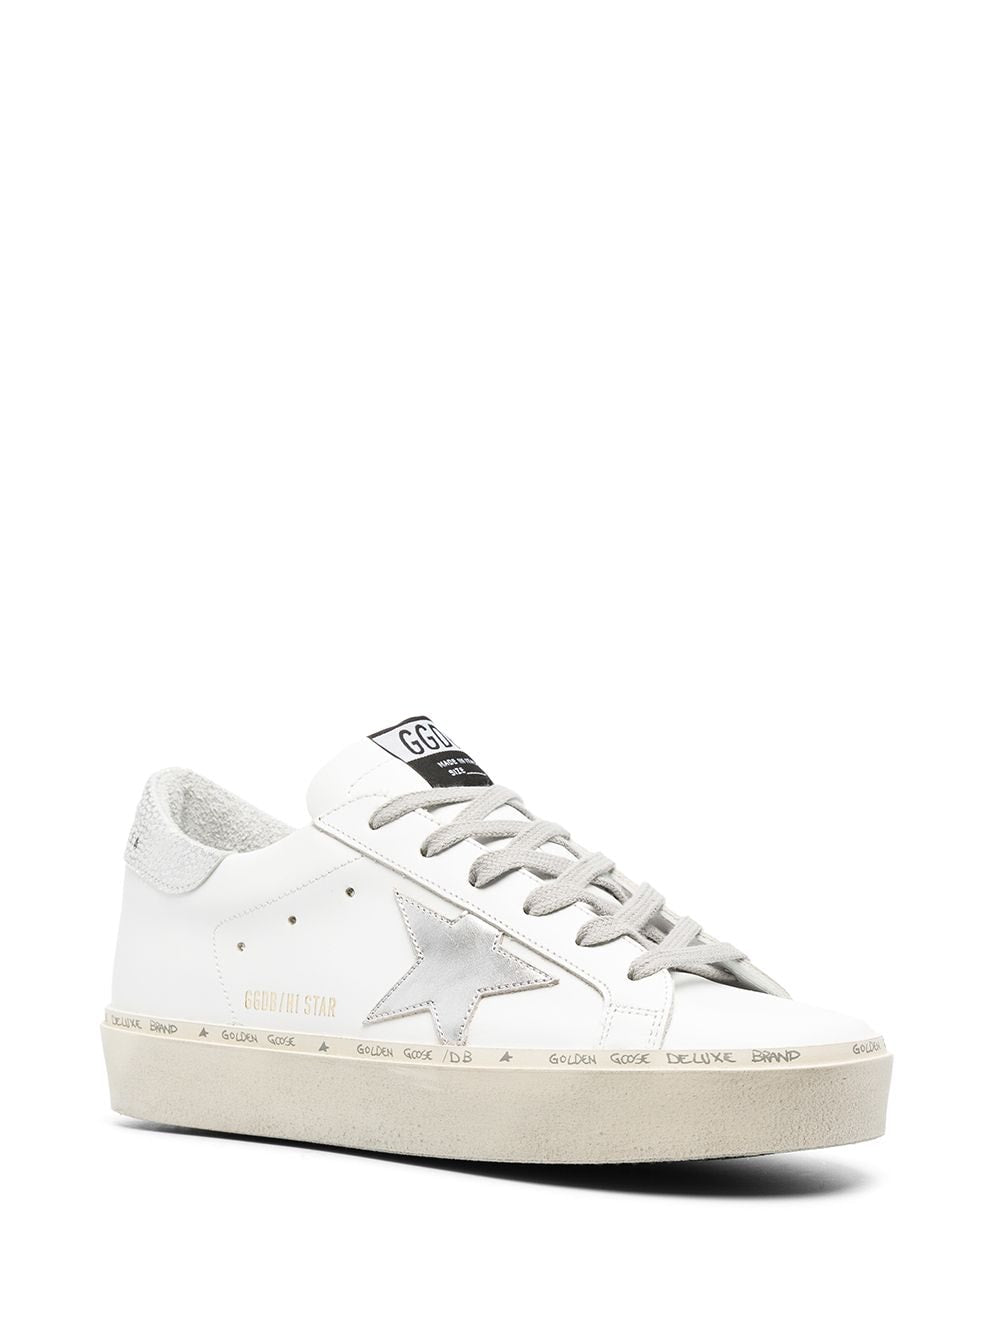 GOLDEN GOOSE White Leather High Top Sneakers for Women